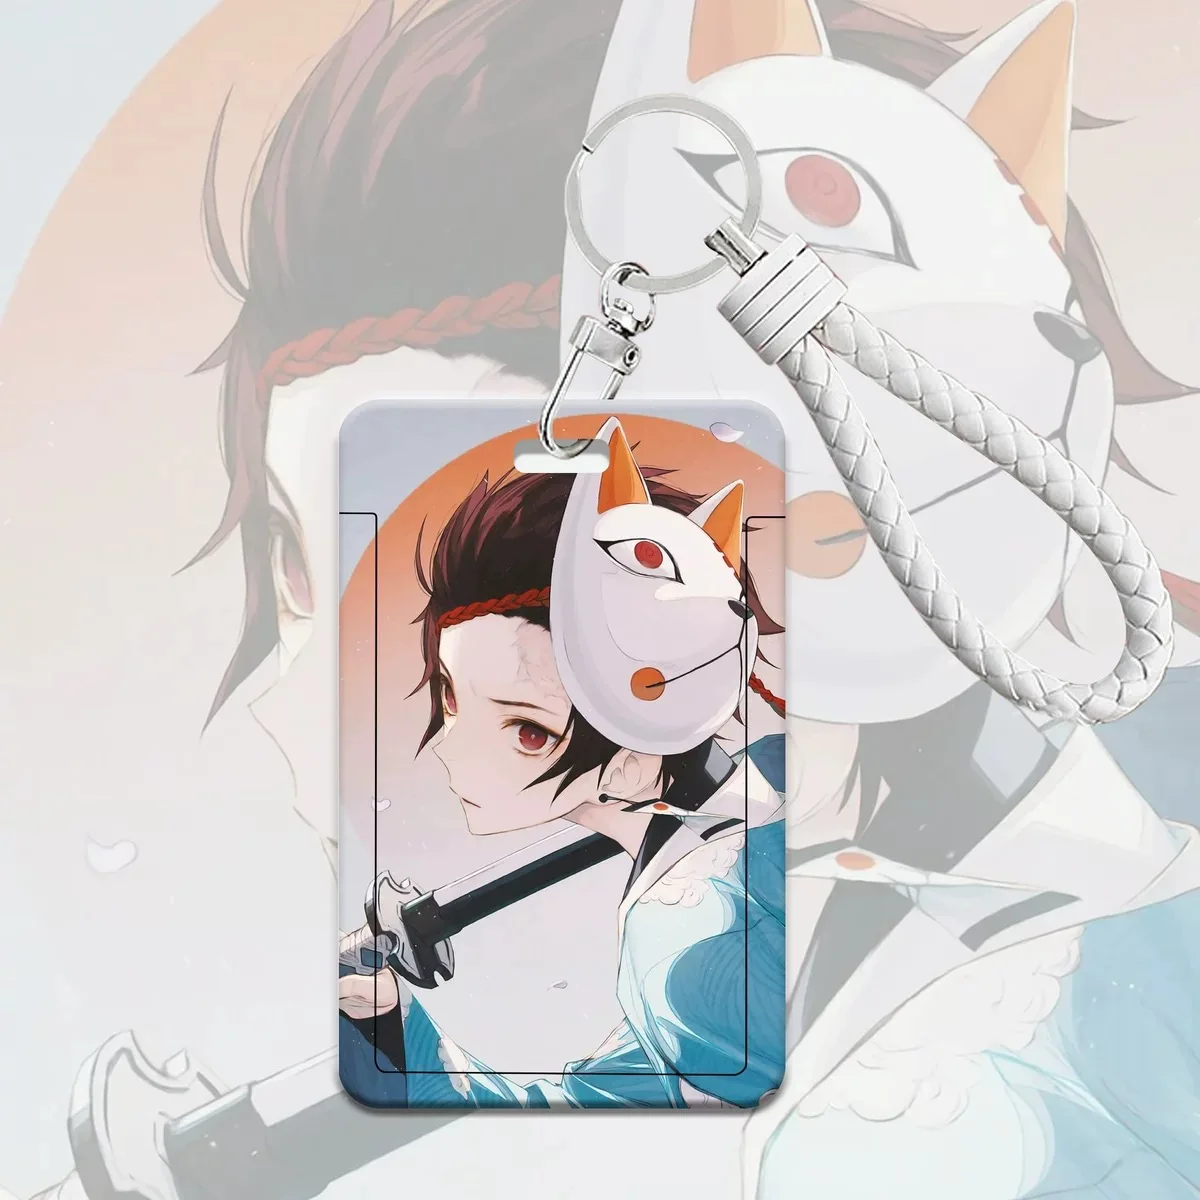 

Blade of Ghost Slayer: Peripheral push-pull card holder with lanyard, student meal card, bus card holder